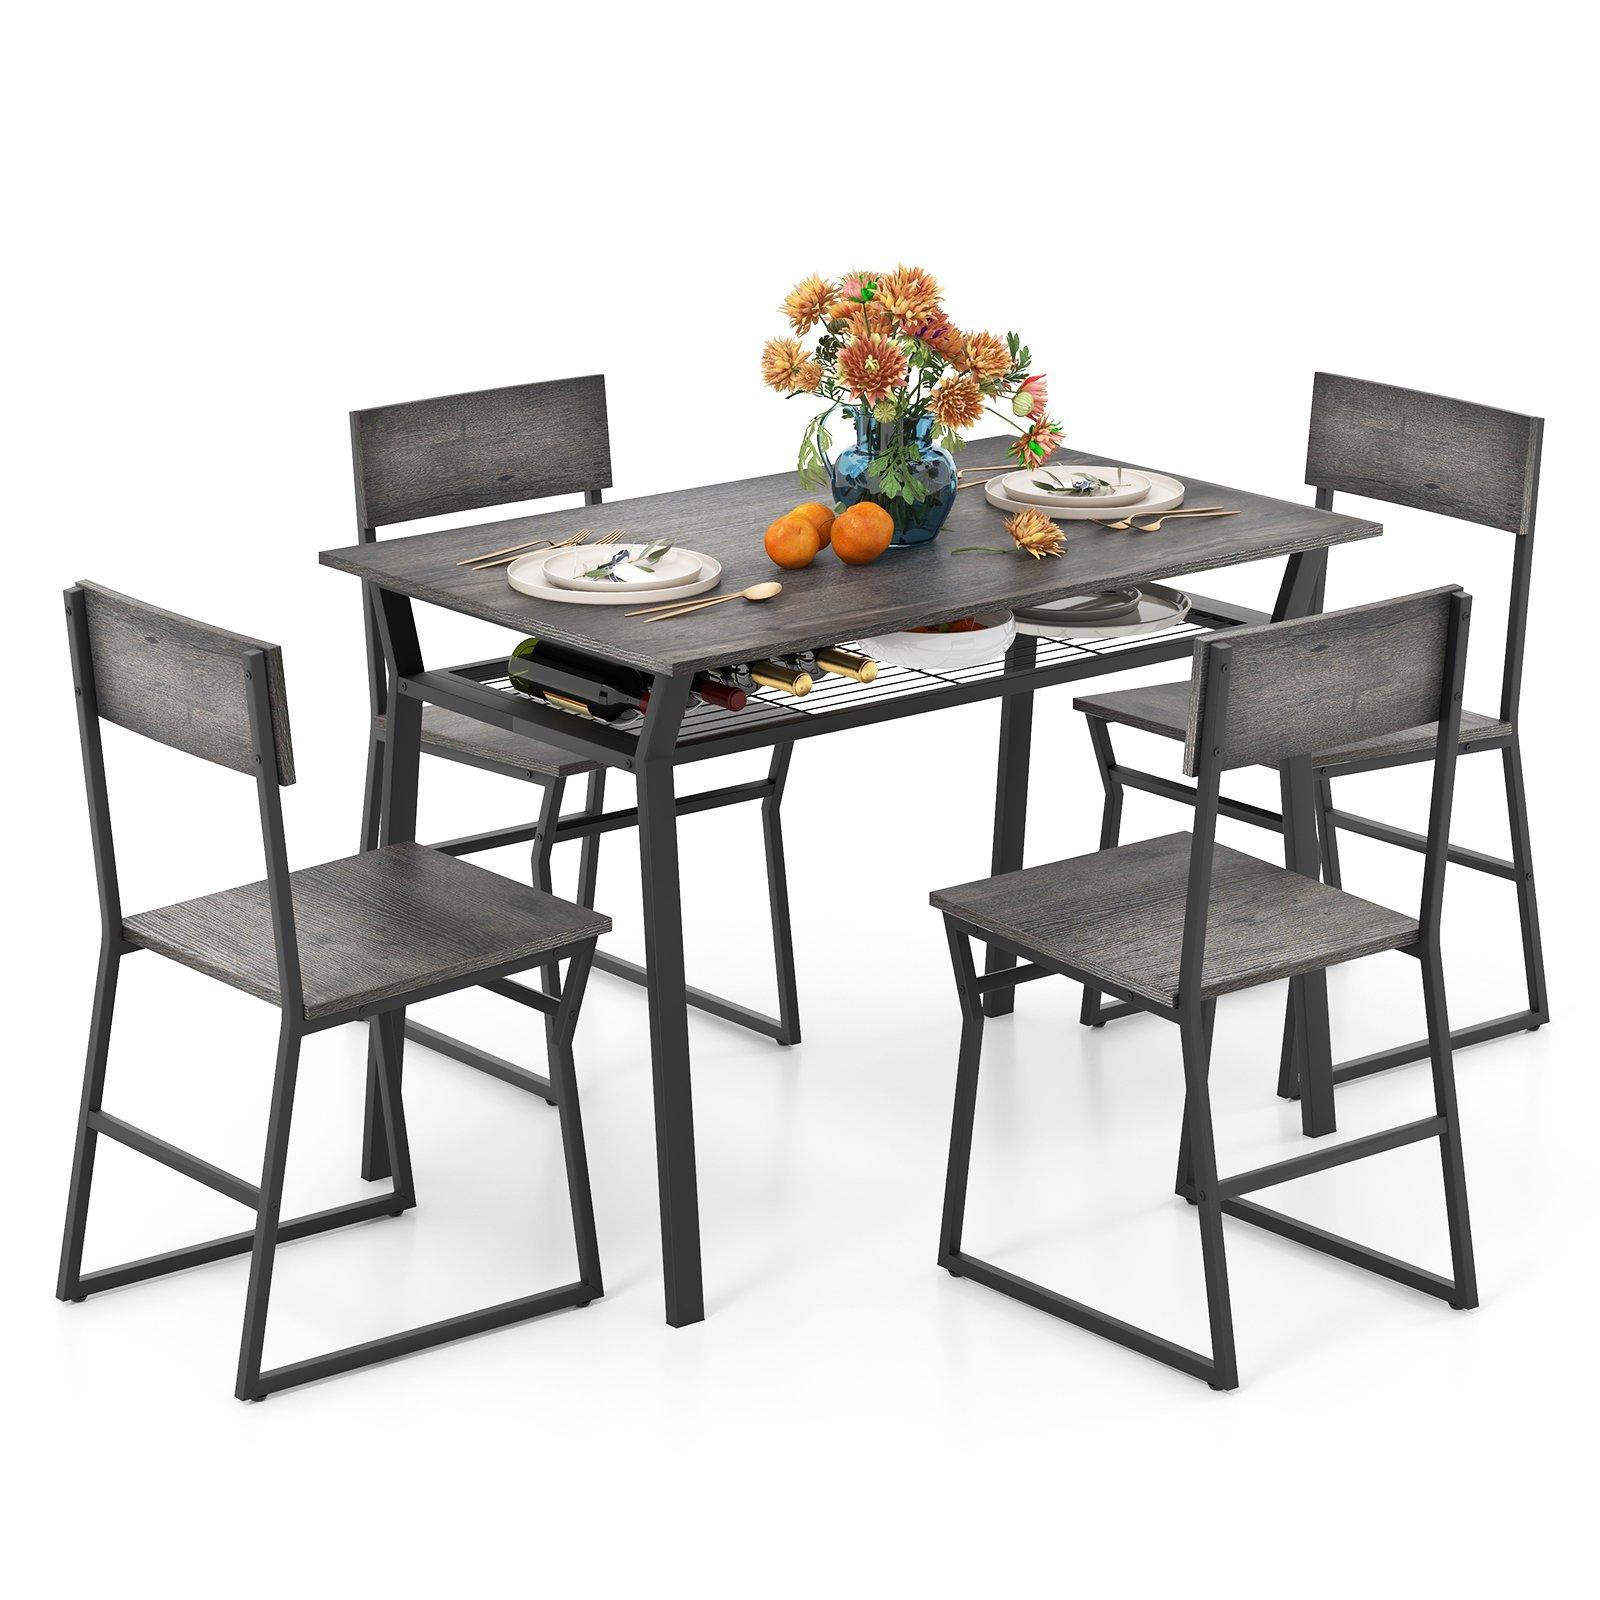 5 PCS Industrial Dining Table Set Rectangular Kitchen Table W/ 4 Chairs Metal Frame